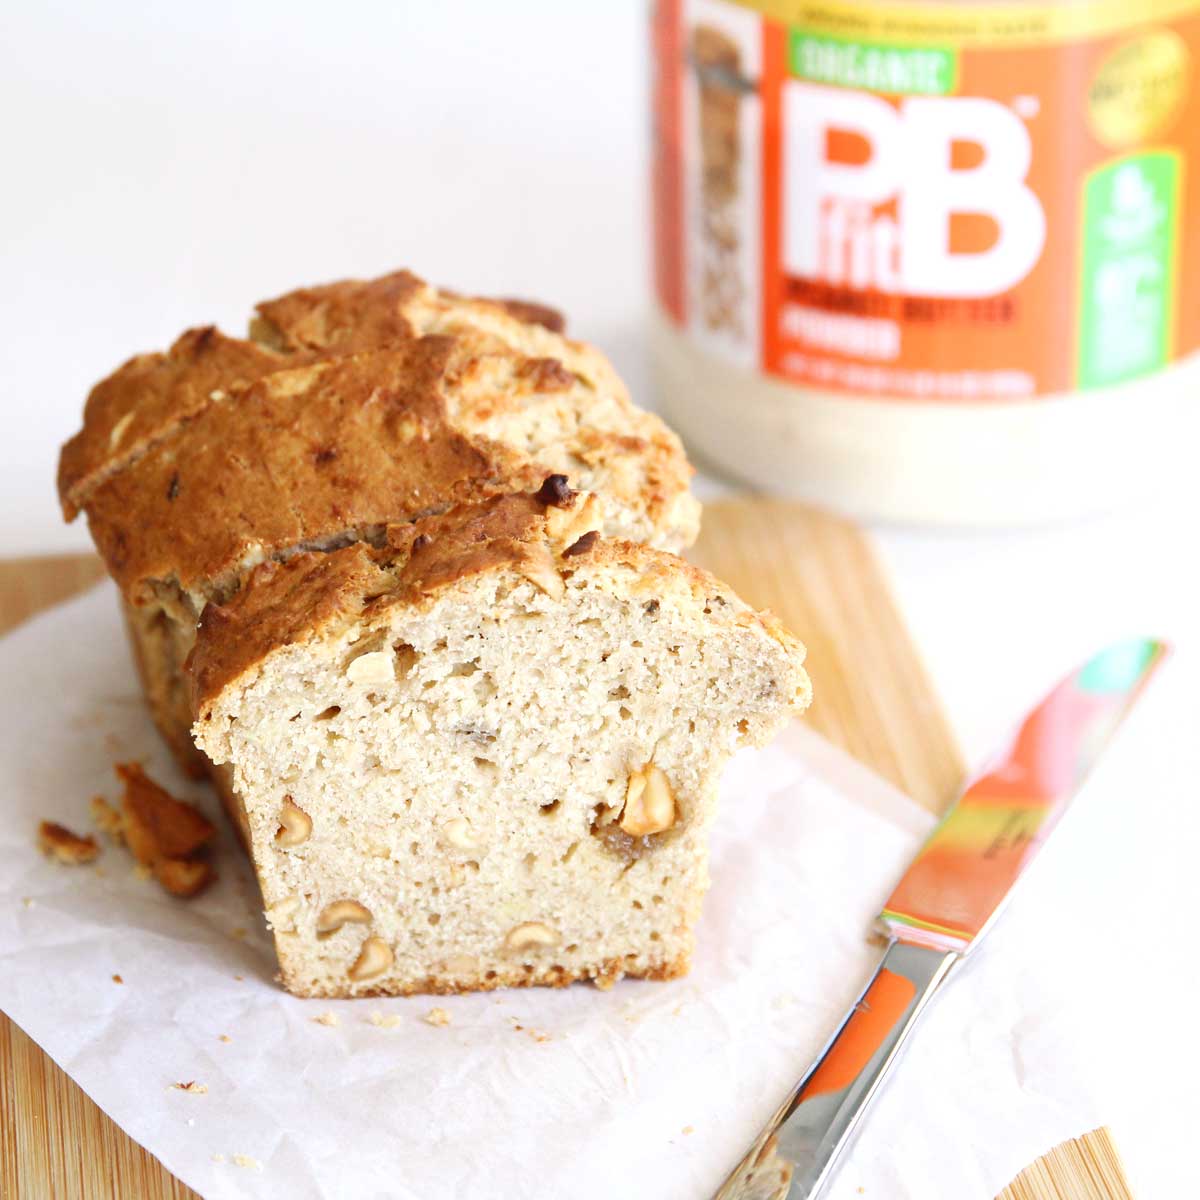 High Protein PB Fit Peanut Butter Banana Bread (Dairy Free, Egg Free Recipe) - Lemon Whipped Cream